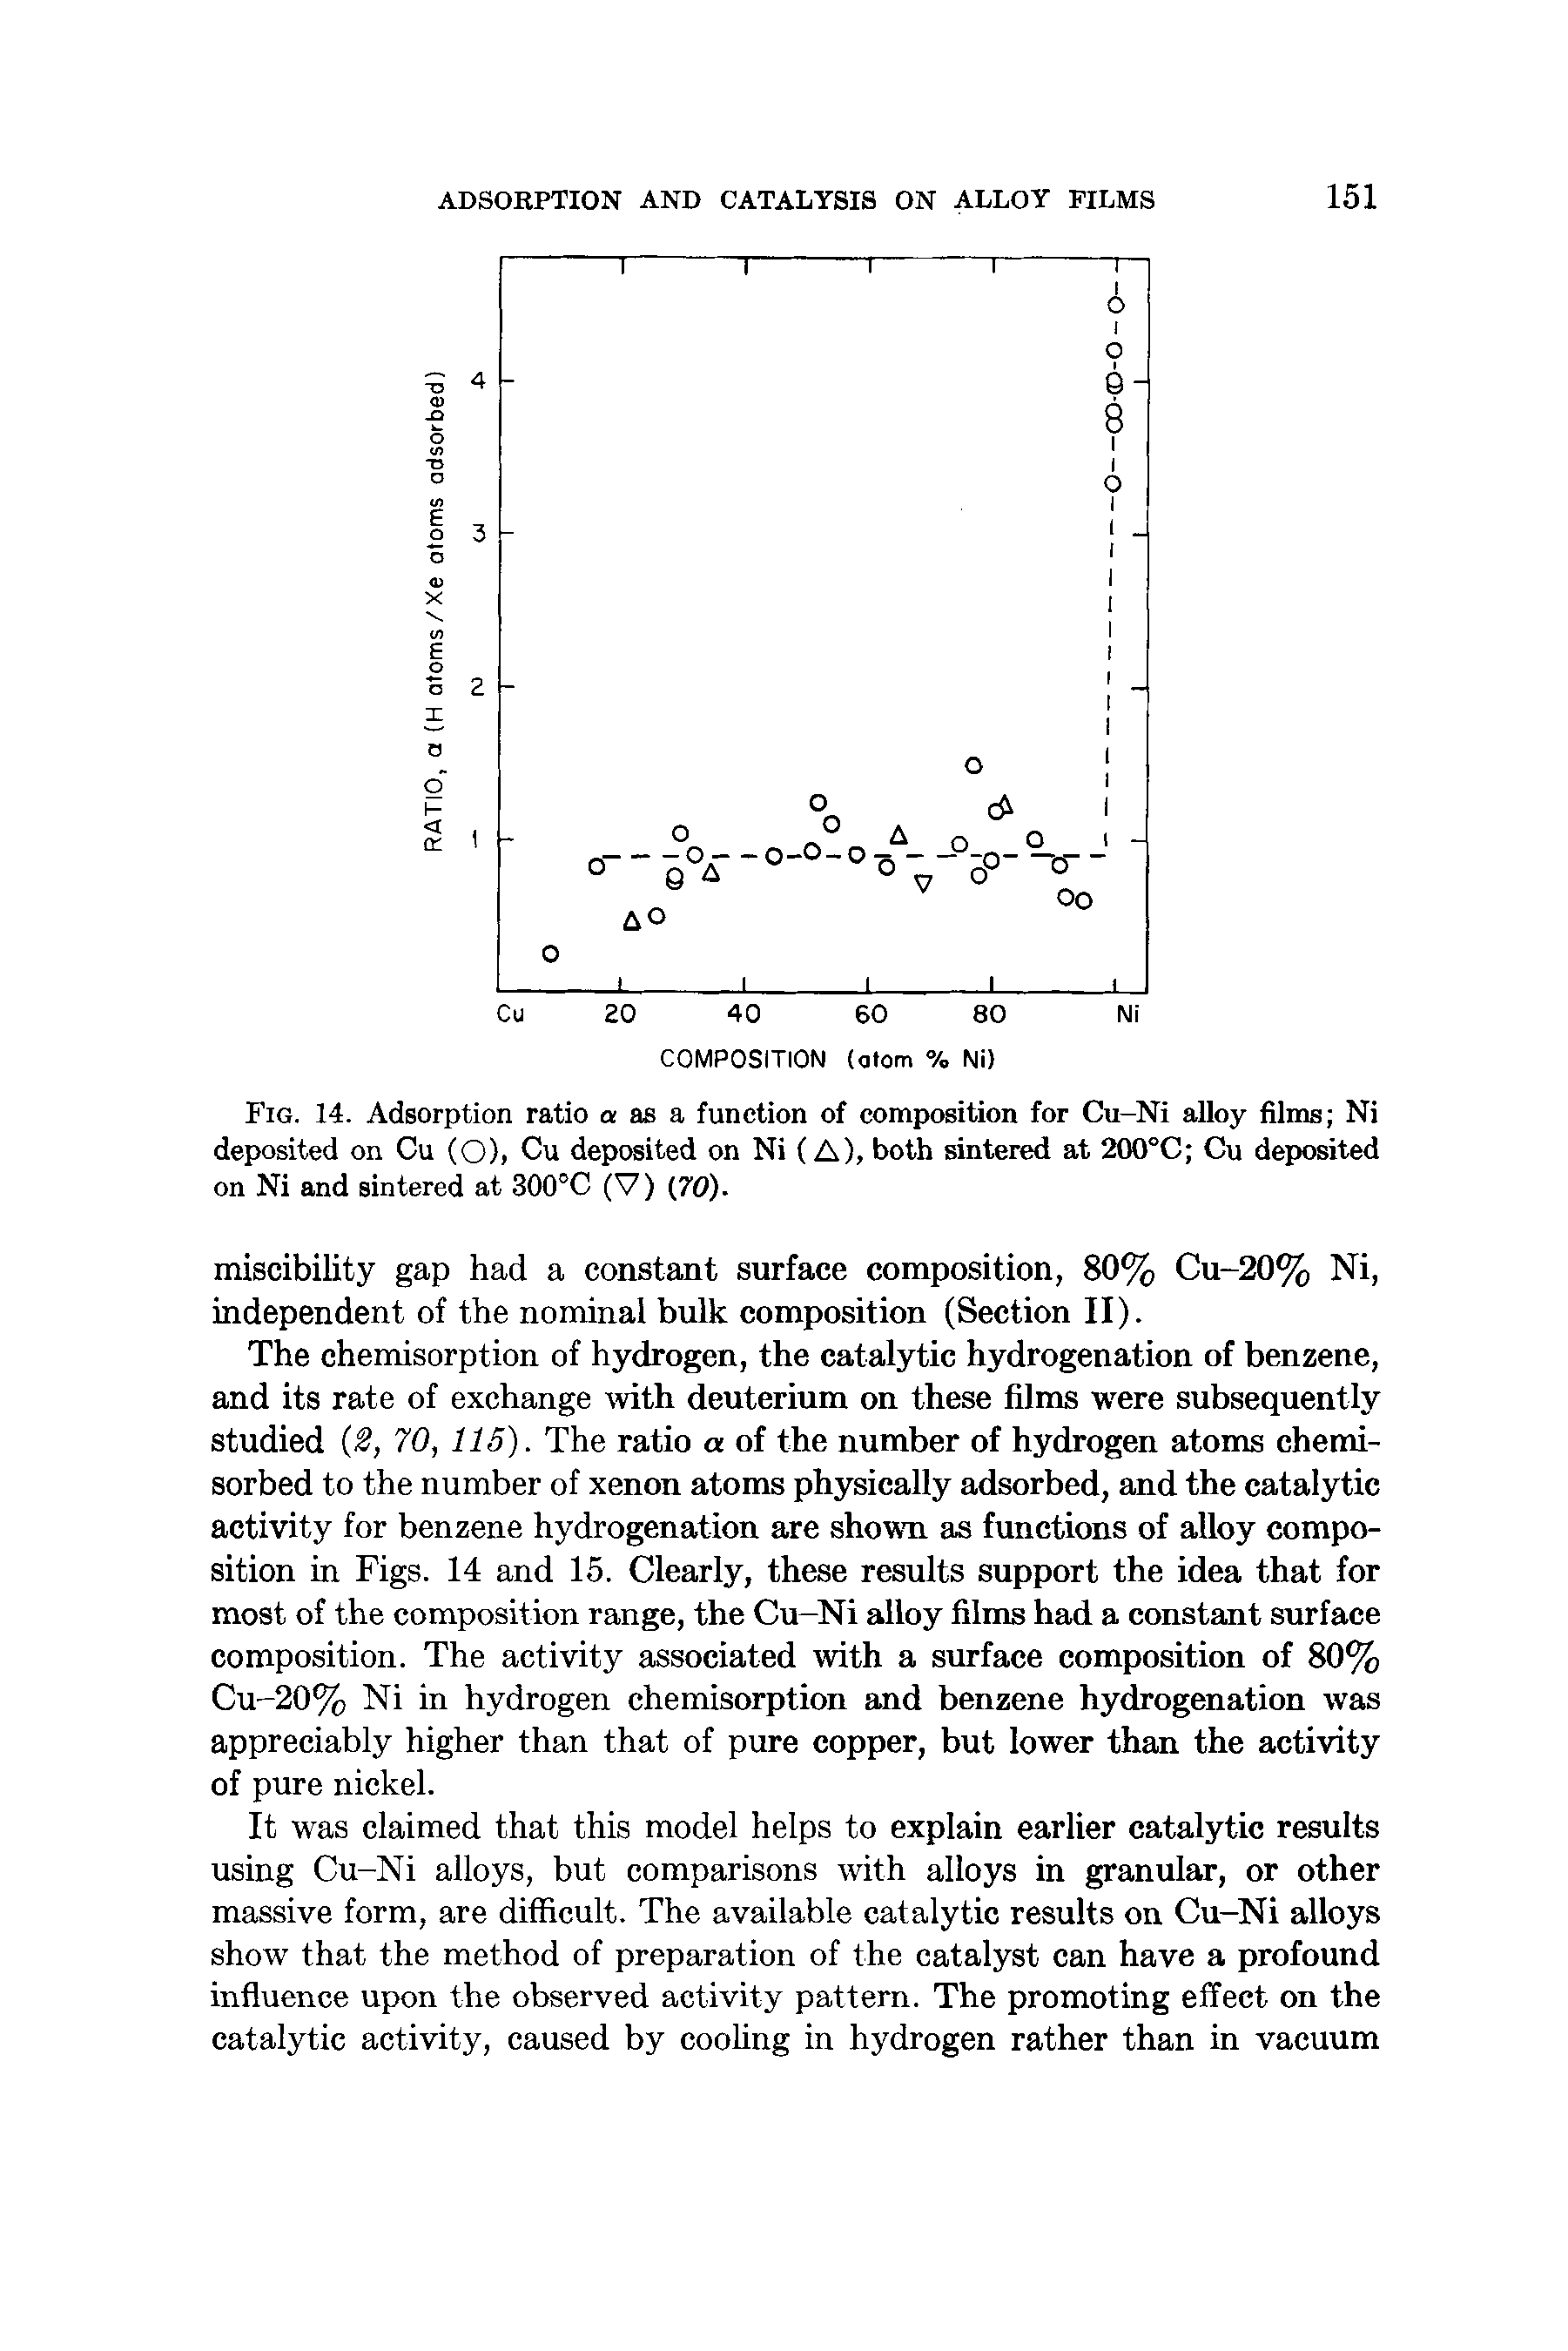 Fig. 14. Adsorption ratio a as a function of composition for Cu-Ni alloy films Ni deposited on Cu (O), Cu deposited on Ni (A), both sintered at 200°C Cu deposited on Ni and sintered at 300°C (V) (70).